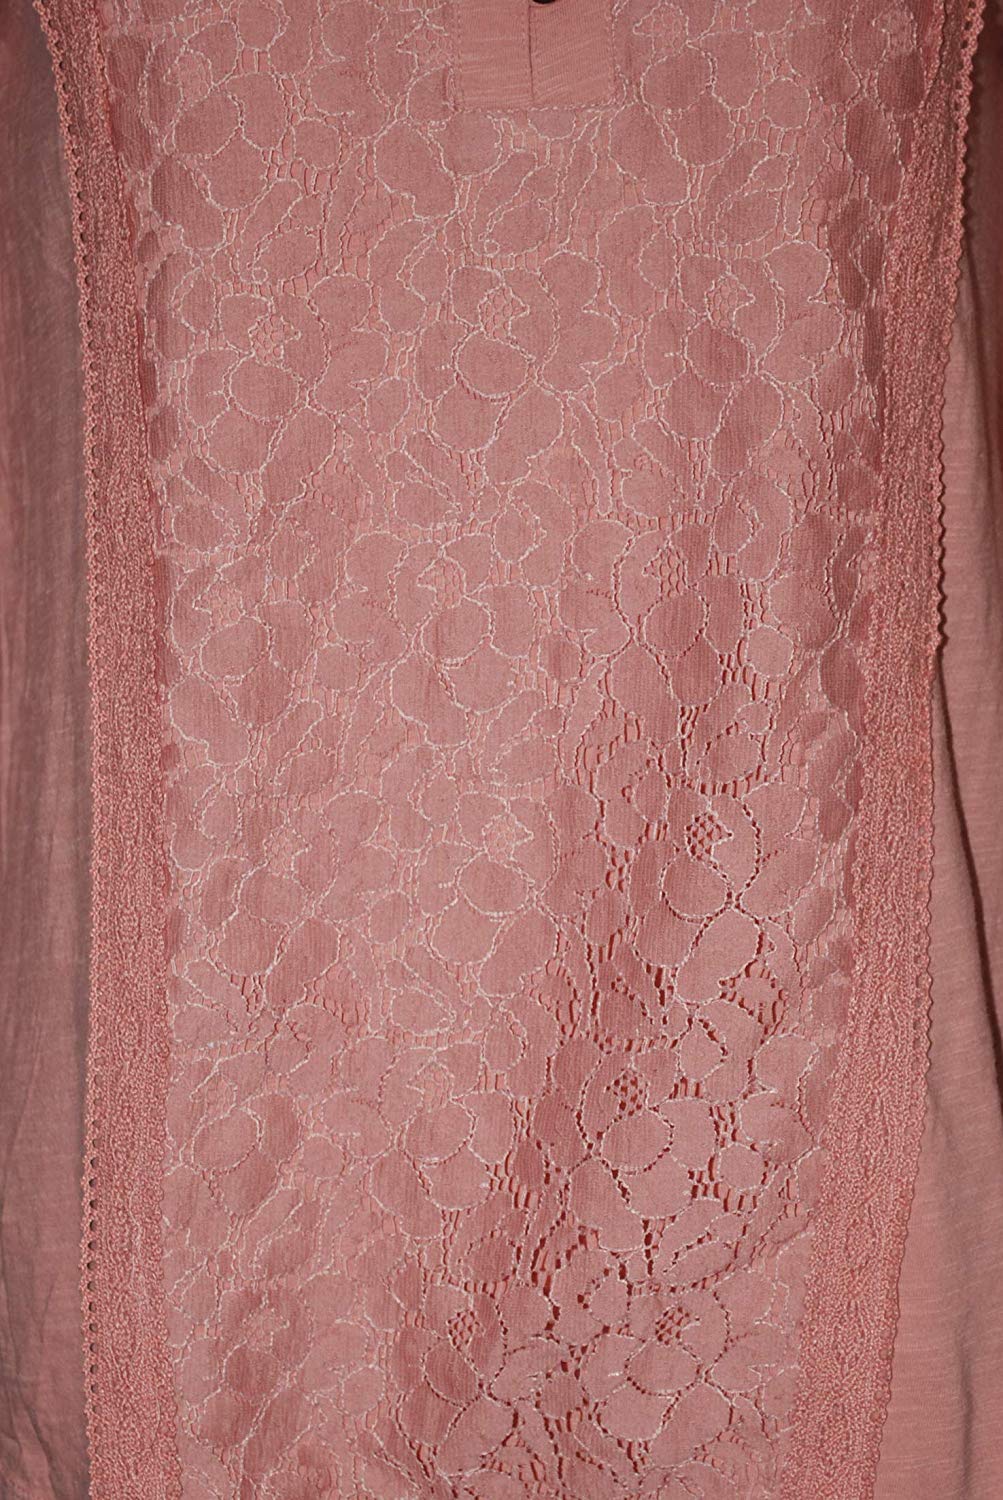 Style & Co. Women's Mixed Lace Trim Cotton Top (XS, Rose Sand)